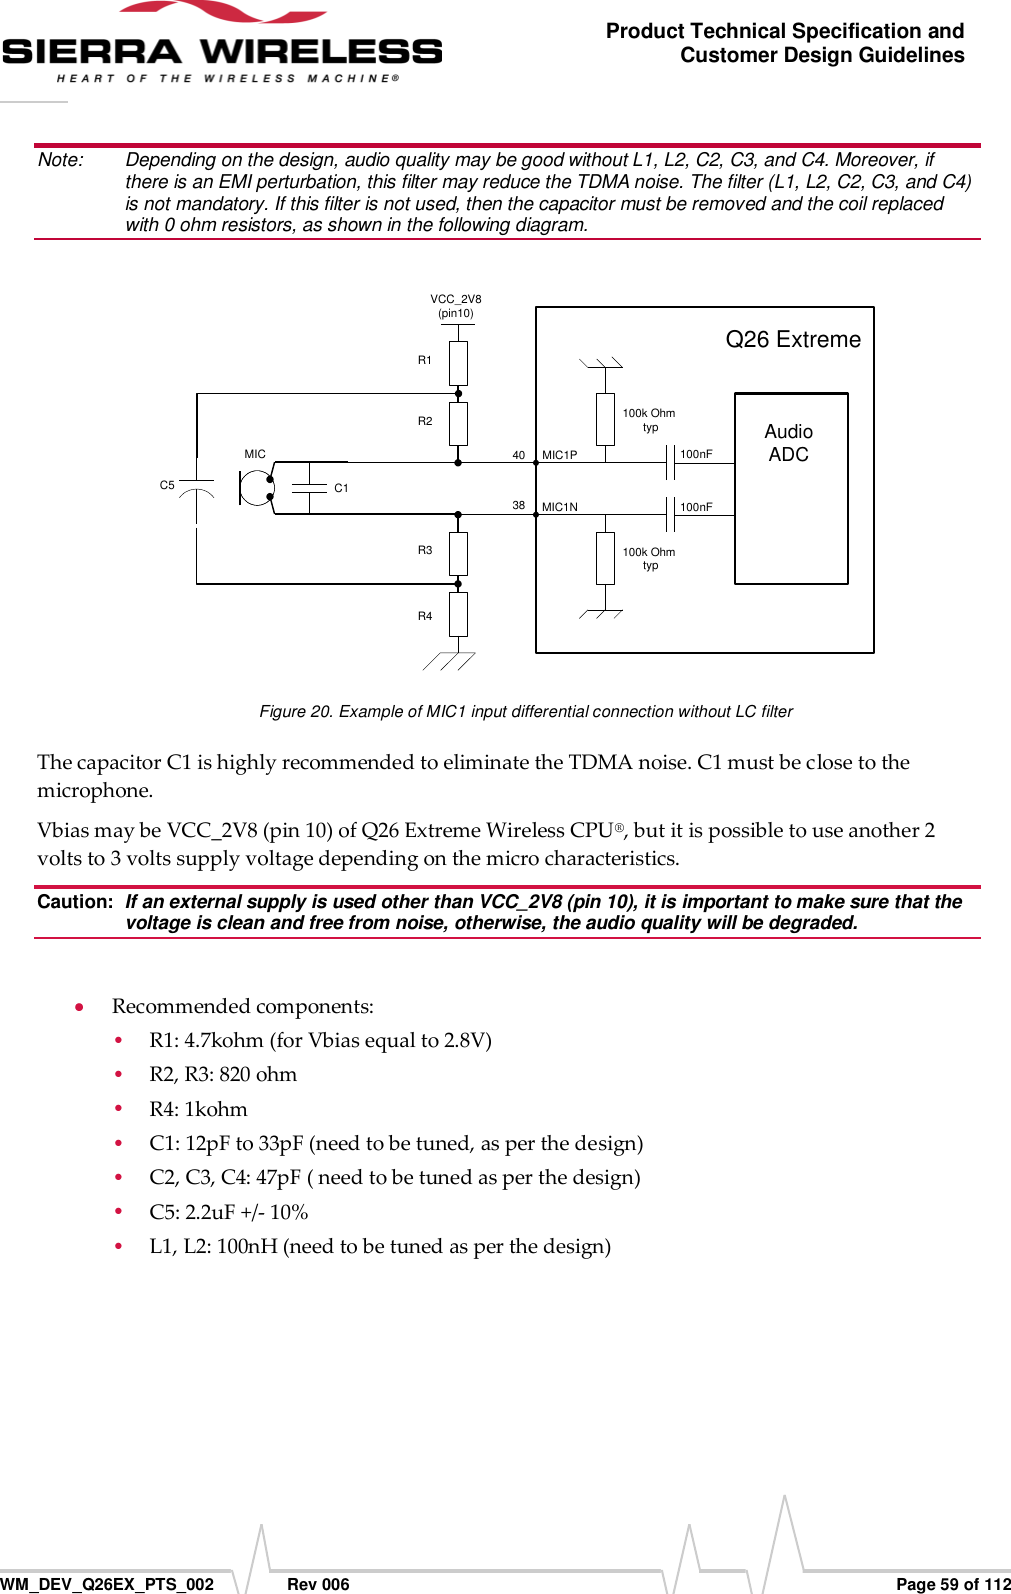      WM_DEV_Q26EX_PTS_002  Rev 006  Page 59 of 112 Product Technical Specification and Customer Design Guidelines Note:   Depending on the design, audio quality may be good without L1, L2, C2, C3, and C4. Moreover, if there is an EMI perturbation, this filter may reduce the TDMA noise. The filter (L1, L2, C2, C3, and C4) is not mandatory. If this filter is not used, then the capacitor must be removed and the coil replaced with 0 ohm resistors, as shown in the following diagram.  C54038AudioADC100k Ohm typ100k Ohm typ100nF100nFMIC1PMIC1NVCC_2V8(pin10)R3R2R1R4C1MICQ26 Extreme Figure 20. Example of MIC1 input differential connection without LC filter The capacitor C1 is highly recommended to eliminate the TDMA noise. C1 must be close to the microphone. Vbias may be VCC_2V8 (pin 10) of Q26 Extreme Wireless CPU®, but it is possible to use another 2 volts to 3 volts supply voltage depending on the micro characteristics. Caution:  If an external supply is used other than VCC_2V8 (pin 10), it is important to make sure that the voltage is clean and free from noise, otherwise, the audio quality will be degraded.   Recommended components:  R1: 4.7kohm (for Vbias equal to 2.8V)  R2, R3: 820 ohm  R4: 1kohm  C1: 12pF to 33pF (need to be tuned, as per the design)  C2, C3, C4: 47pF ( need to be tuned as per the design)  C5: 2.2uF +/- 10%   L1, L2: 100nH (need to be tuned as per the design)  